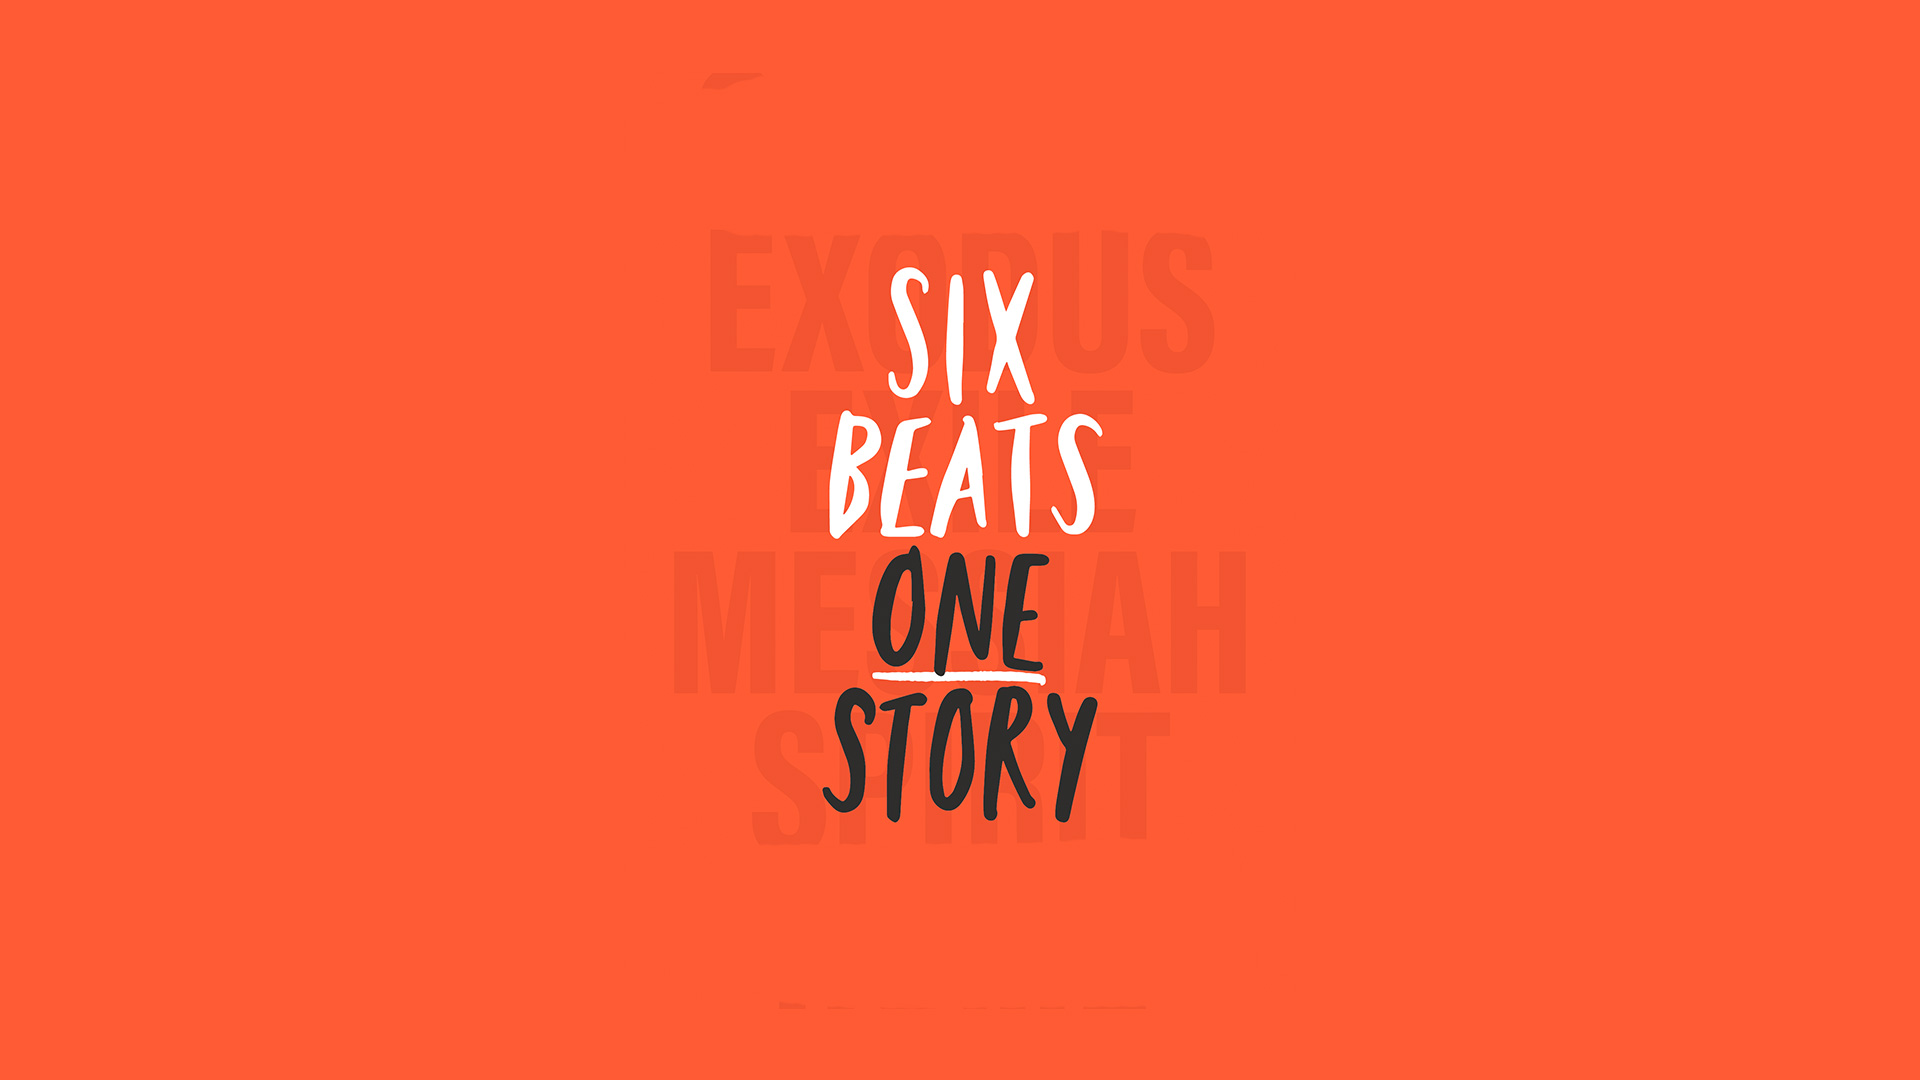 Six Beats One Story is a brand new creative devotional that takes you through the whole Bible story.